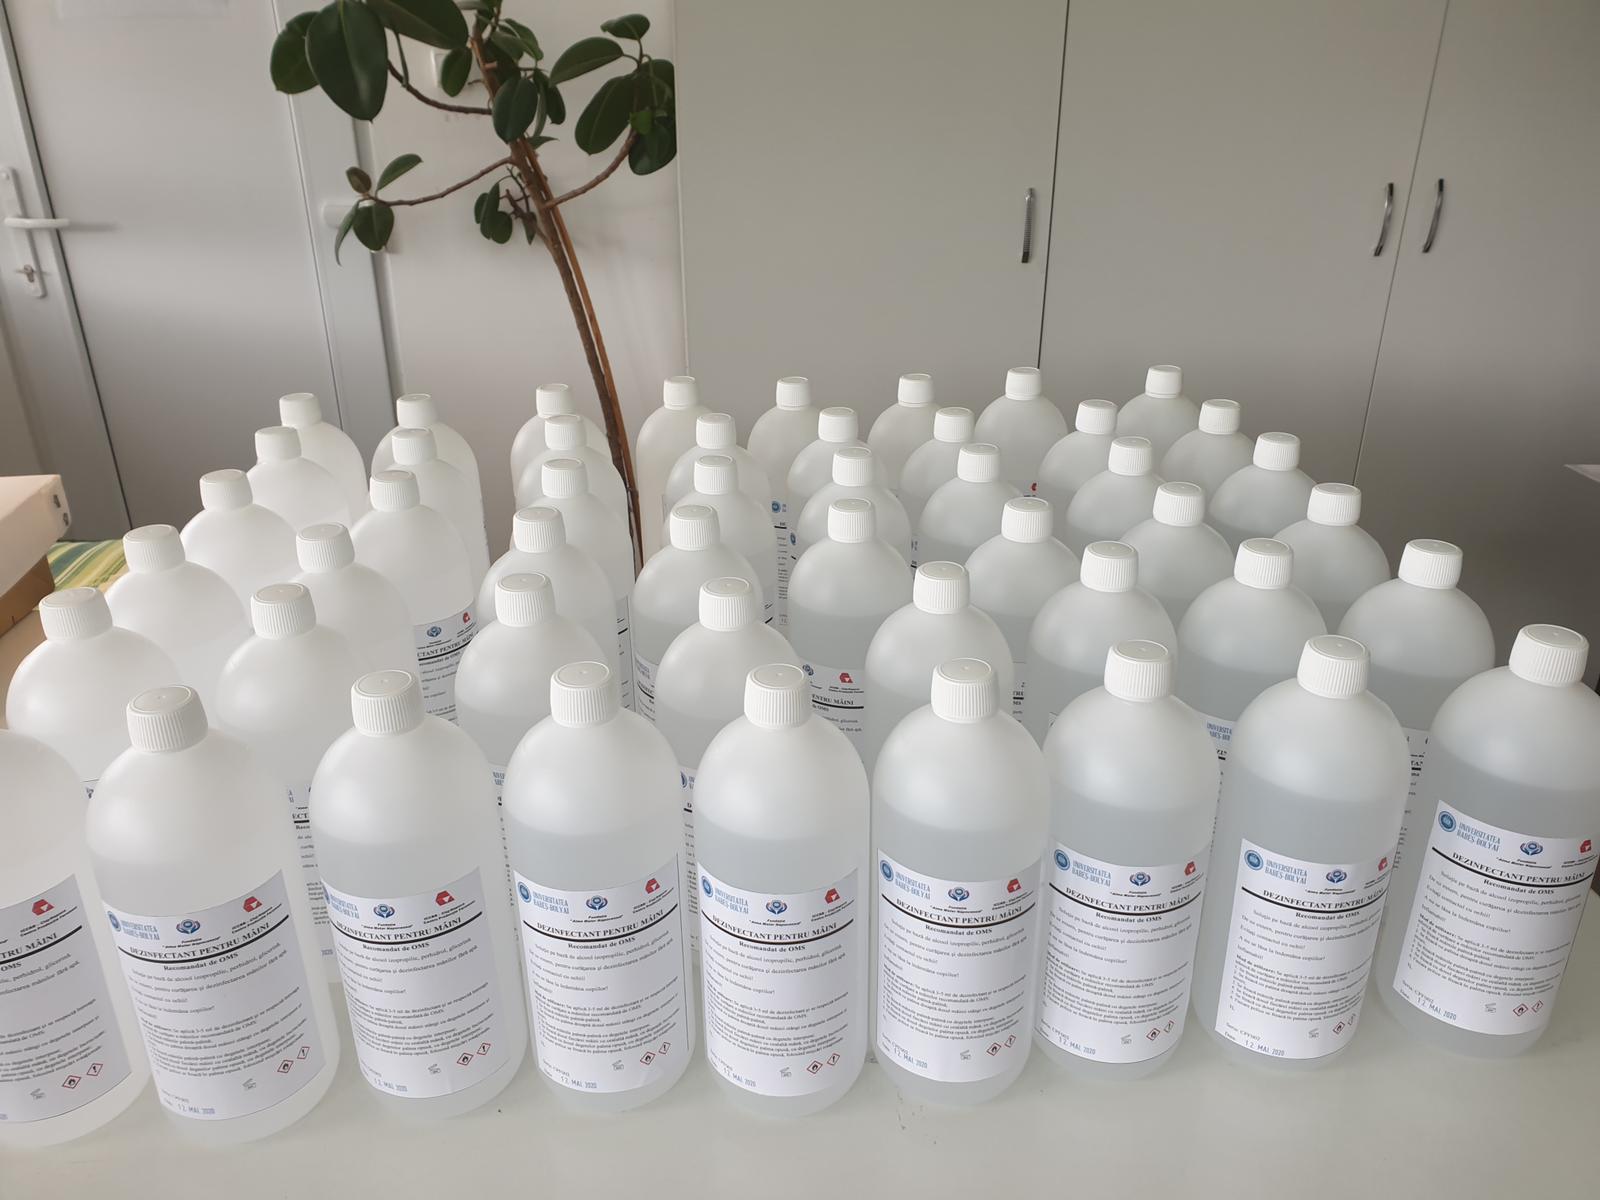 UBB Foundation and Pheromones Production Center have prepared the first batch of disinfectants for Cluj hospitals